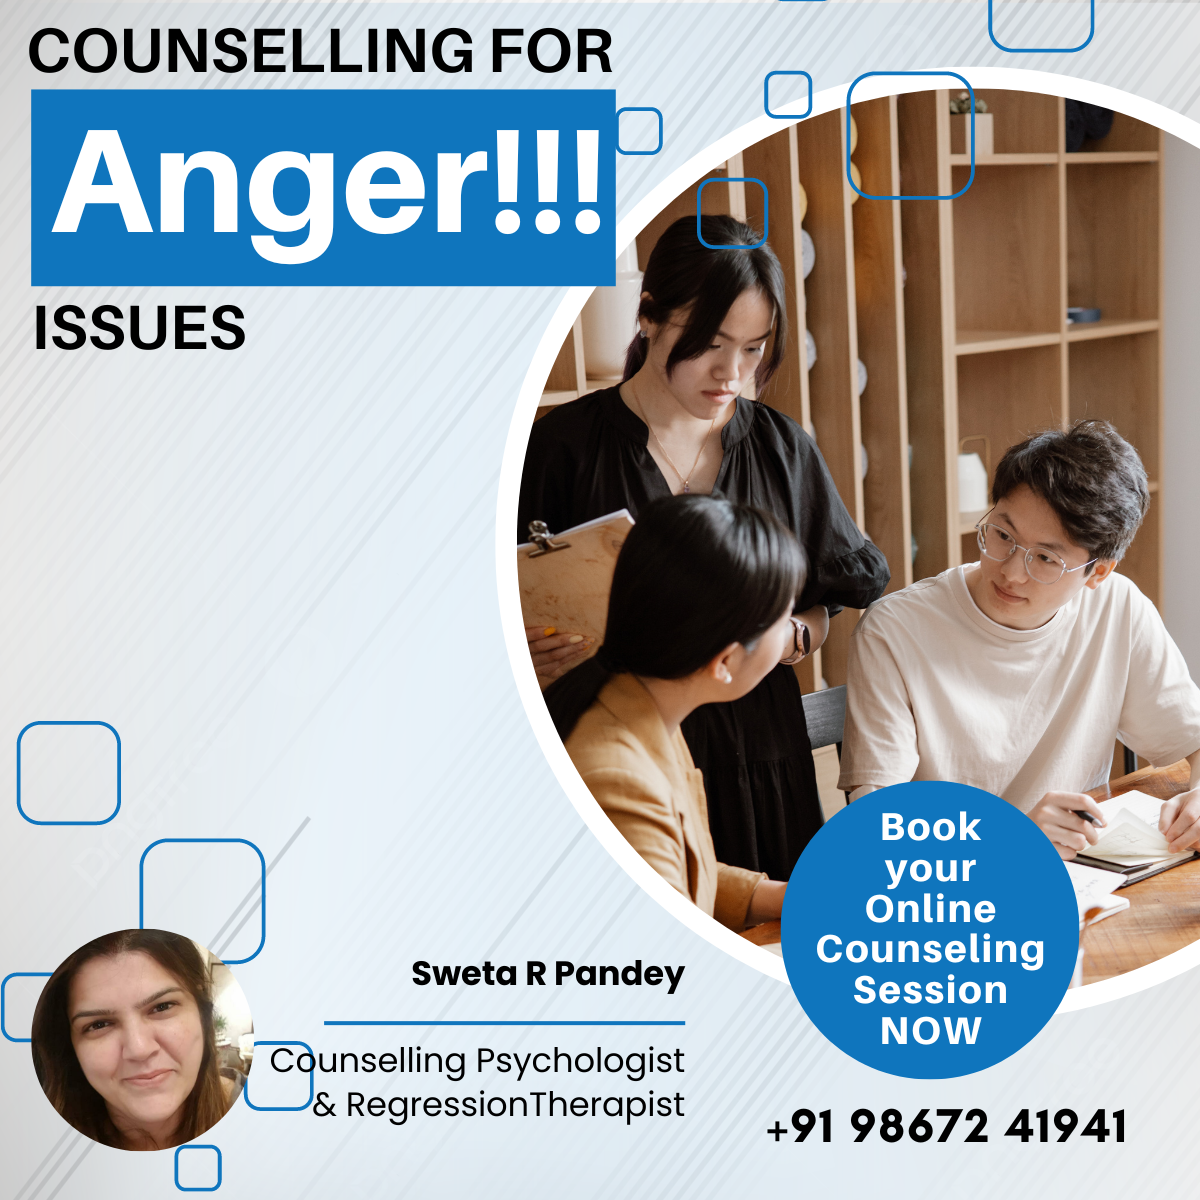 Counselling for Anger Issues - Sweta R Pandey - Rishikesh